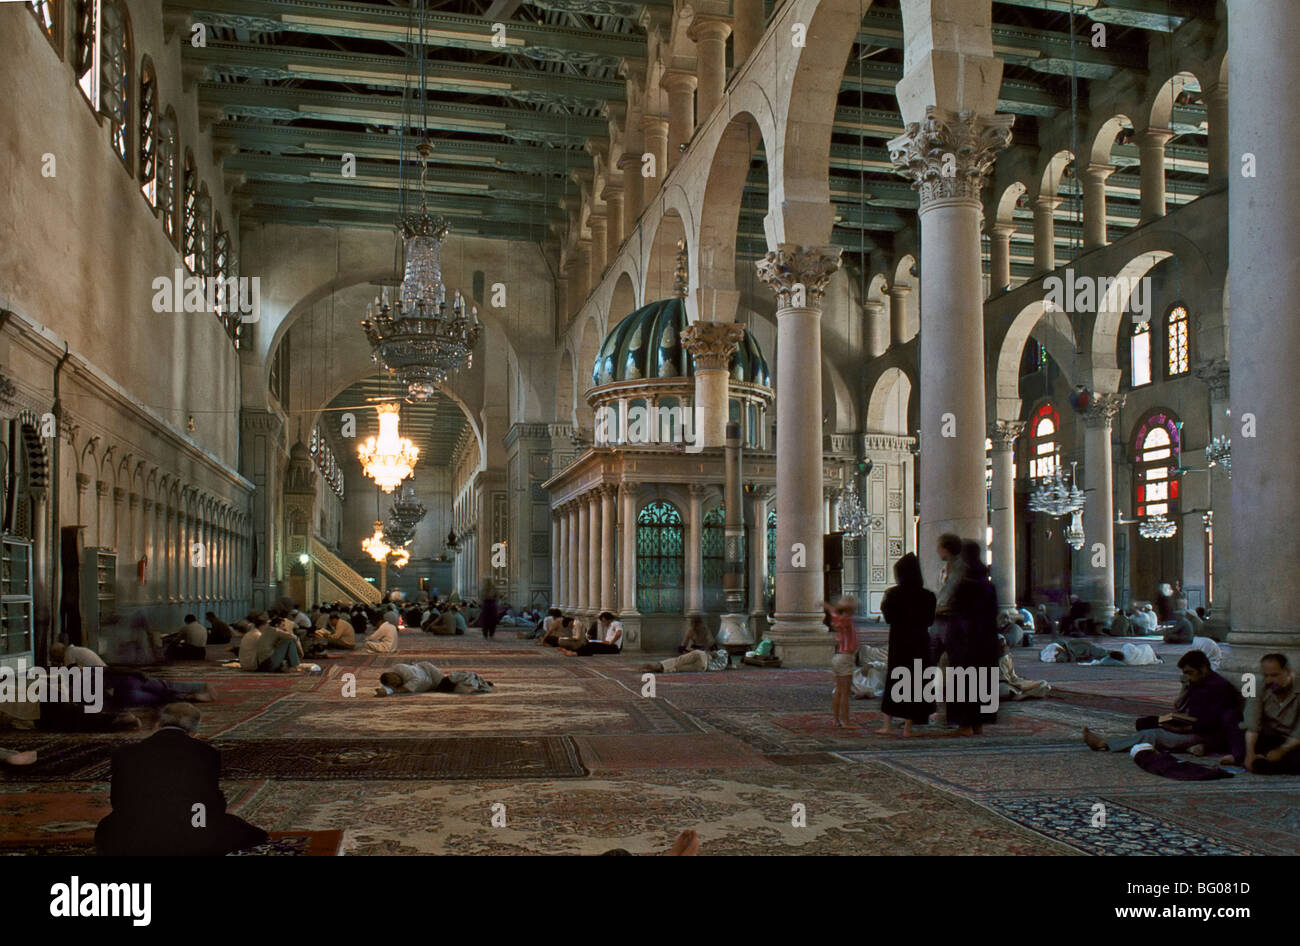 Interior of Omayad mosque in the Old city, Damascus, Syria, Middle East Stock Photo